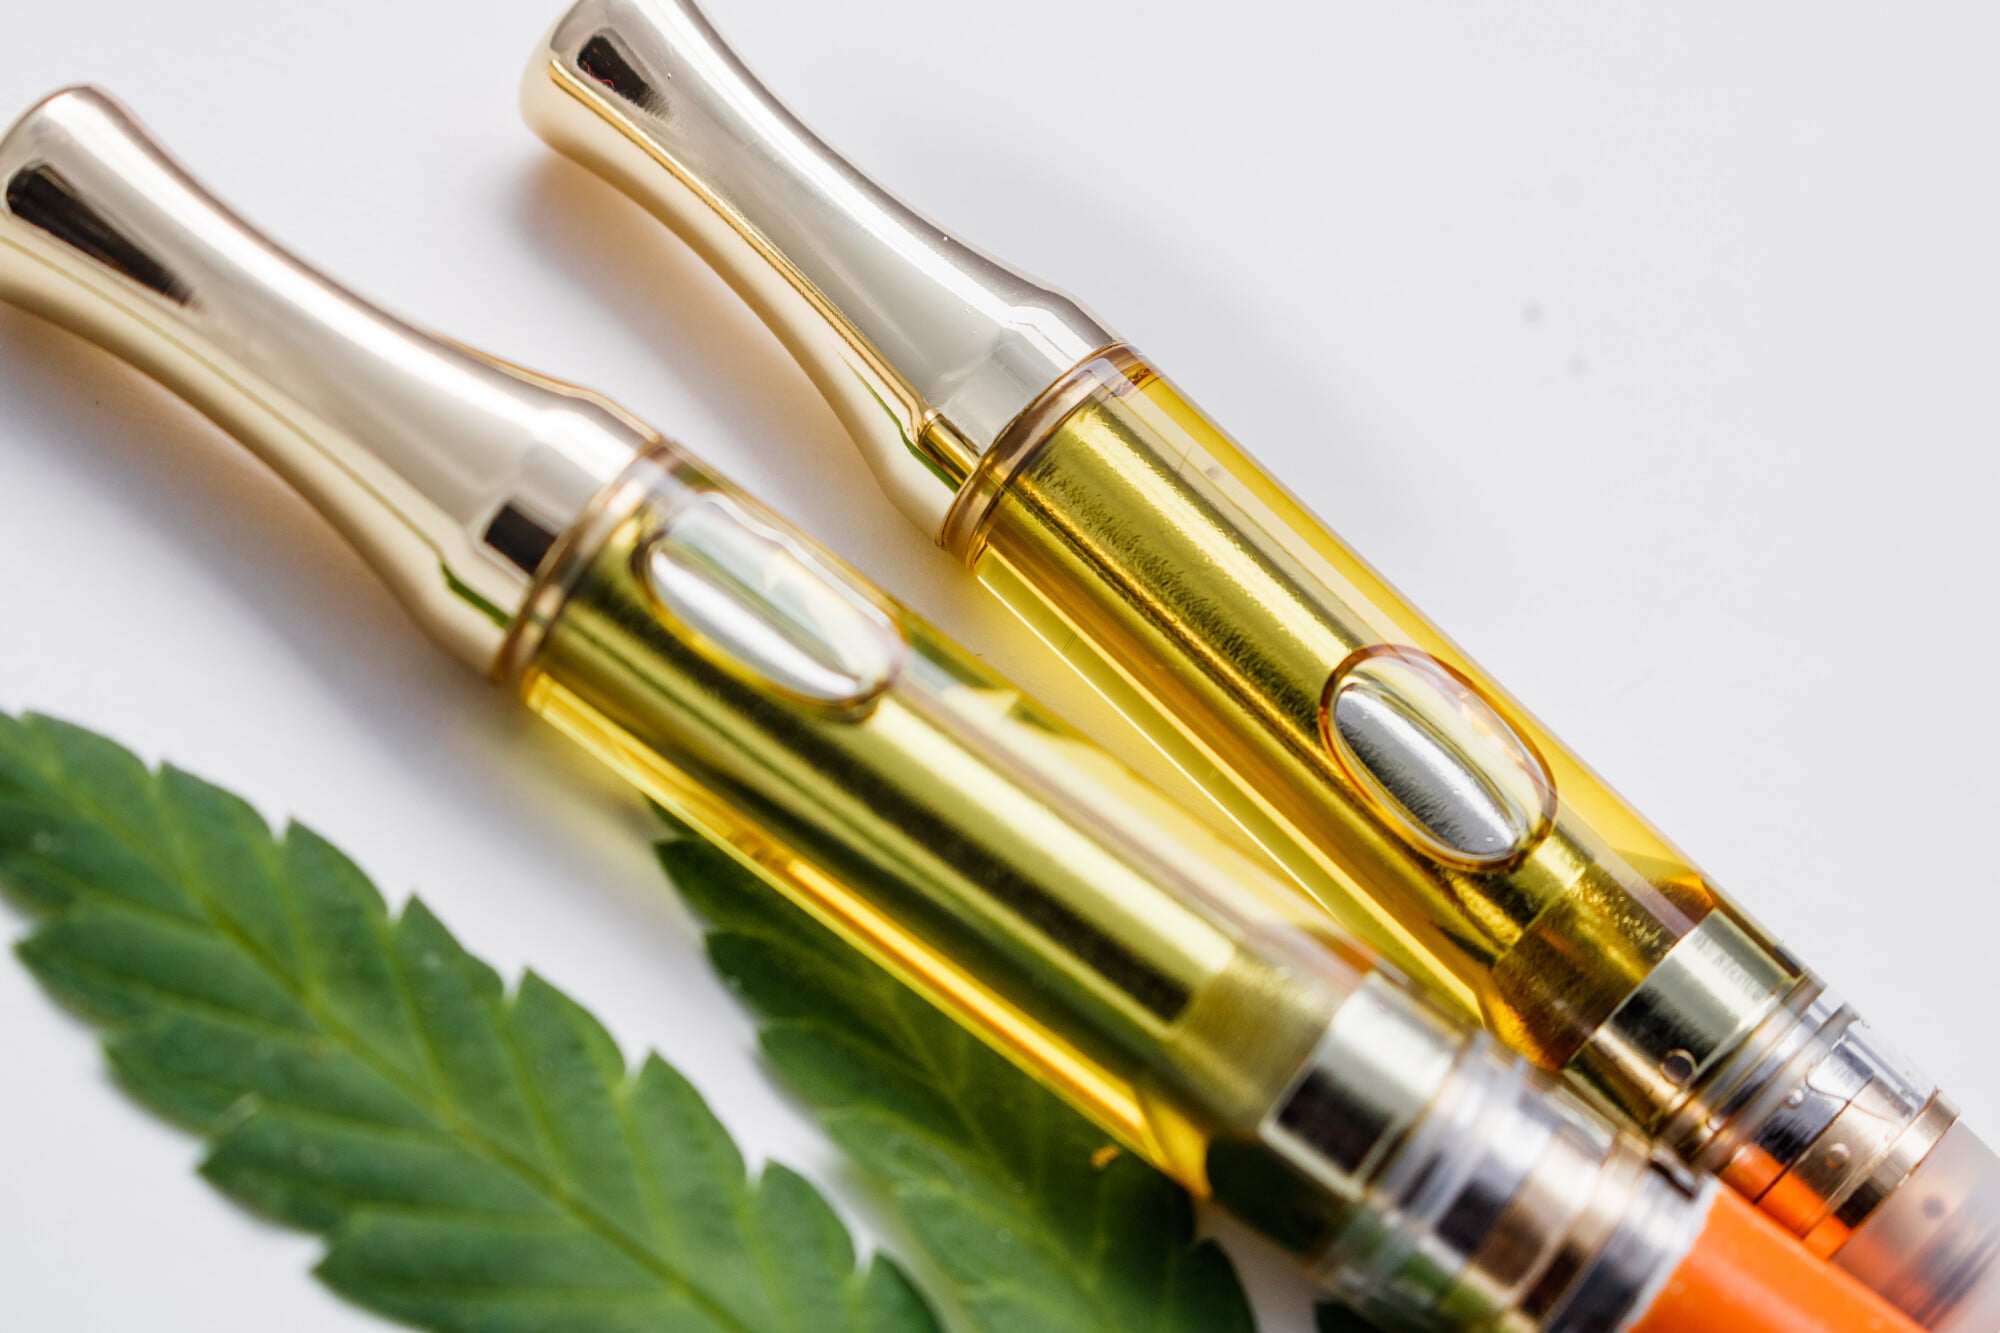 What is THC vape juice, and what types are available? Read this guide to learn about these cartridges, the tools you need, and how to choose the right one.